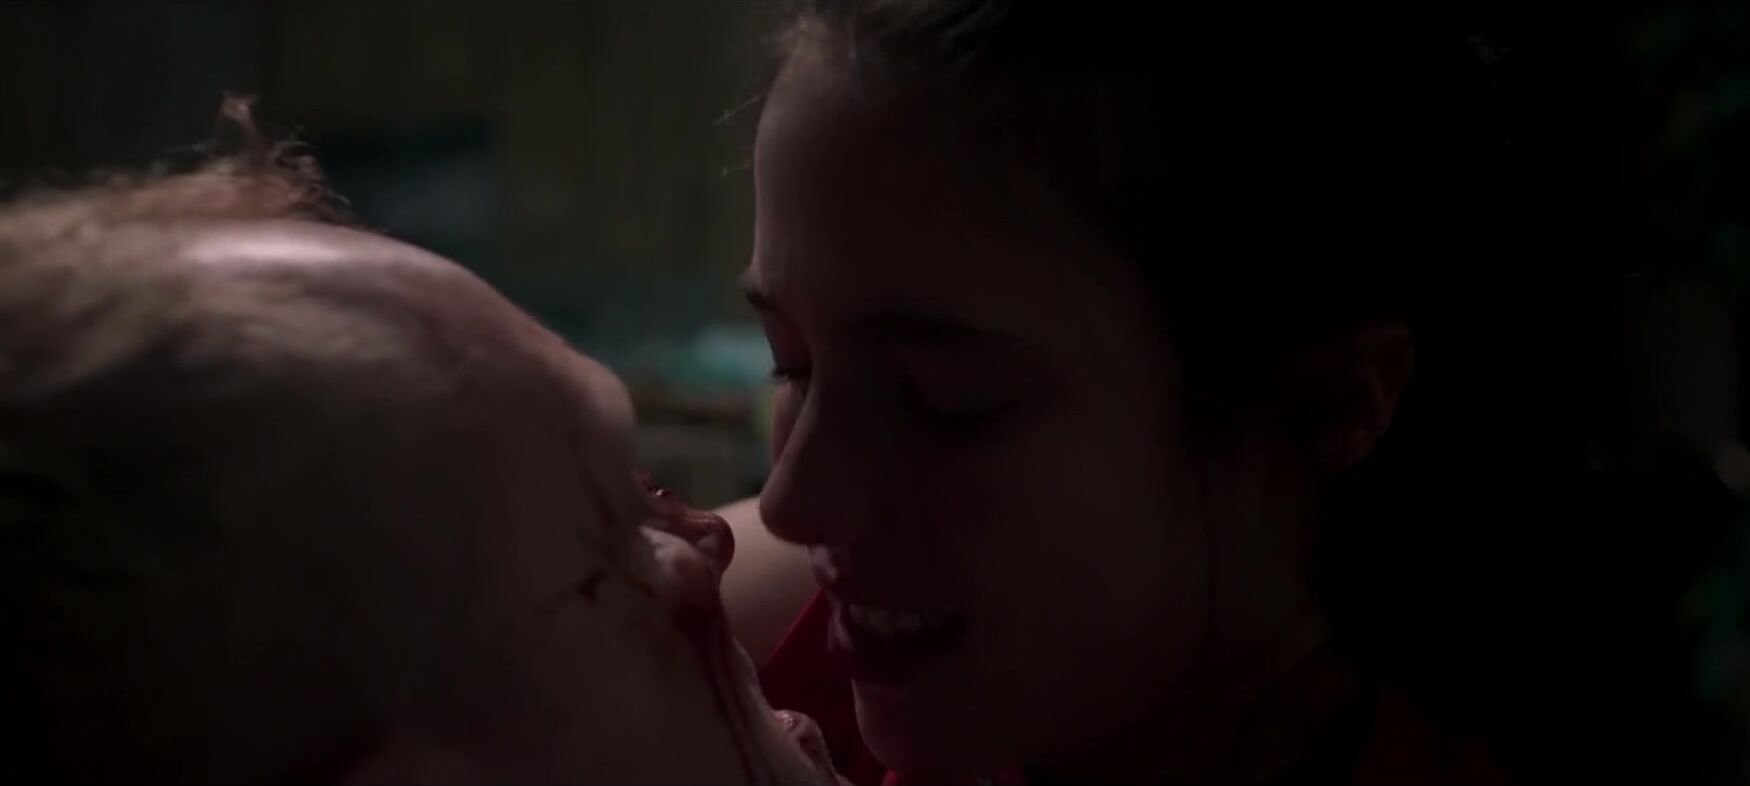 Fleshlight Nude and sex moments of skinny sexual pervert Margaret Qualley from Donnybrook (2018) Hardcore Fucking